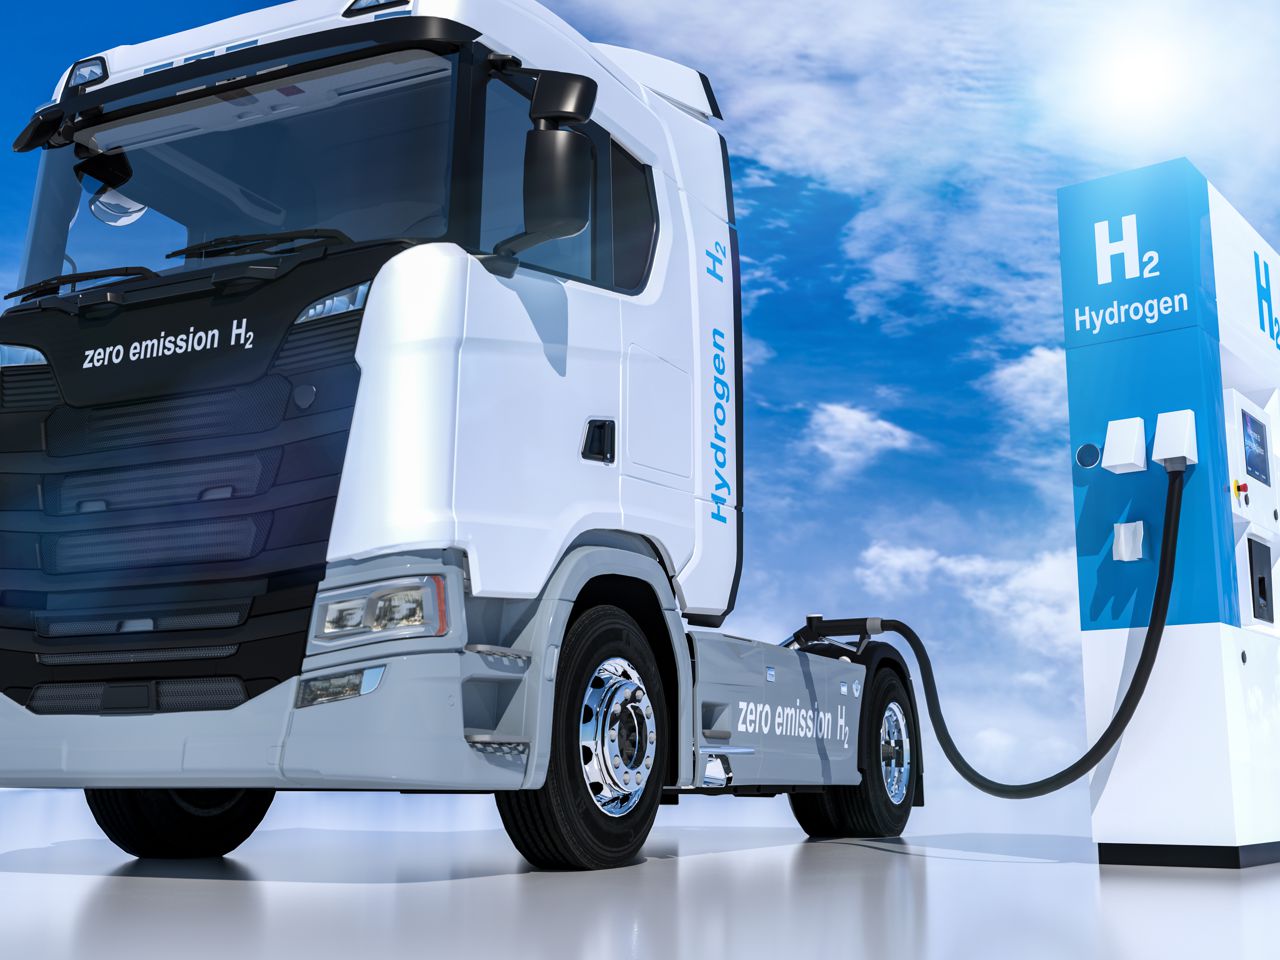 Truck at fuel filling station with hydrogen symbol